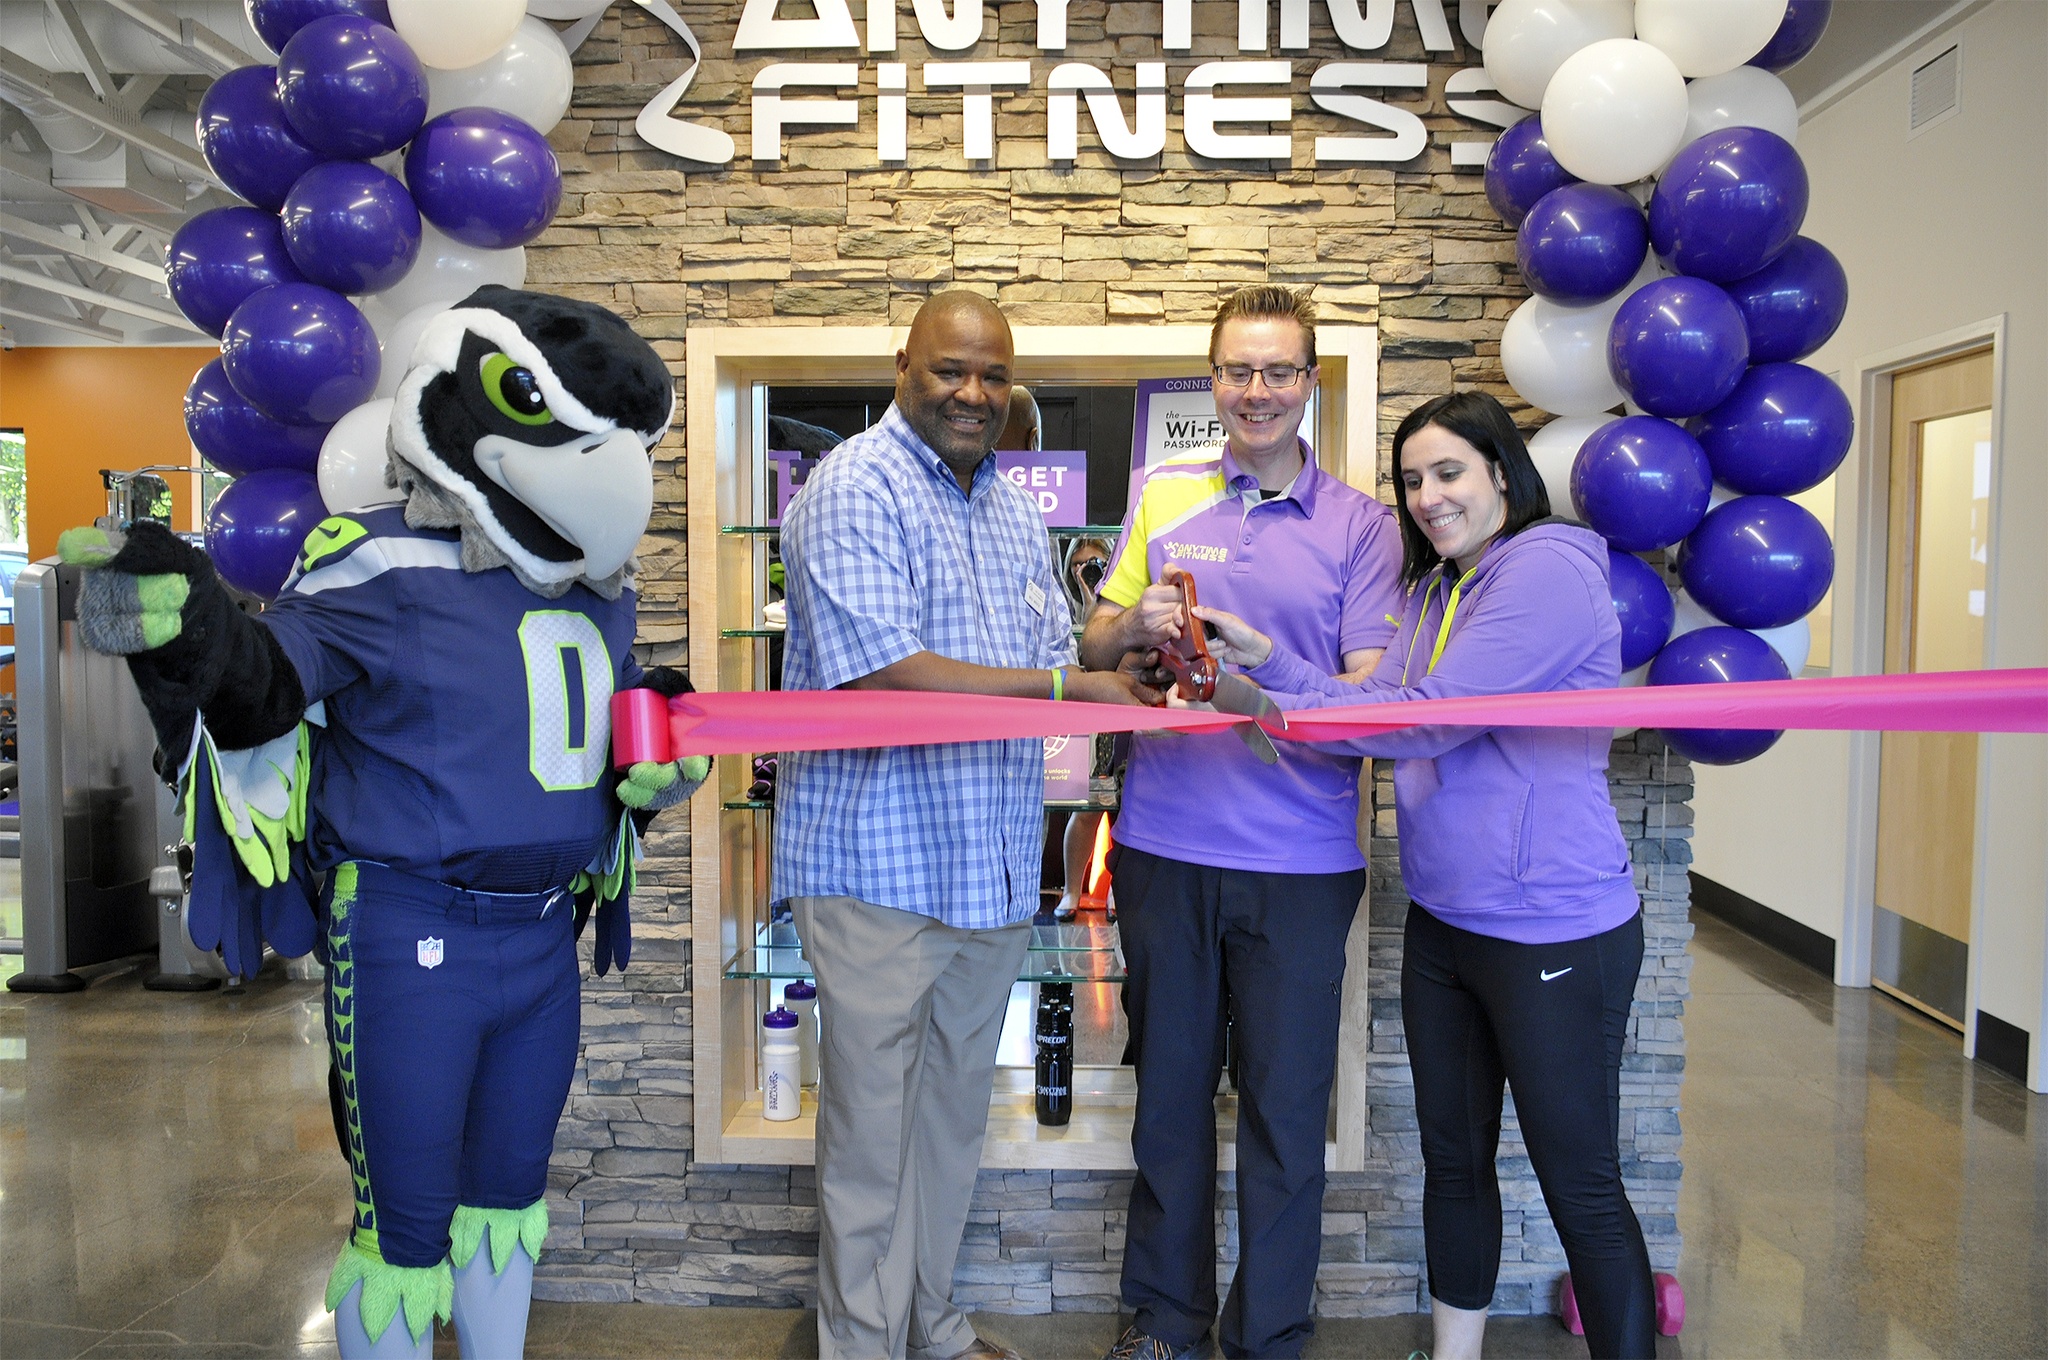 Anytime Fitness owners Sean and Carmen Dettloff